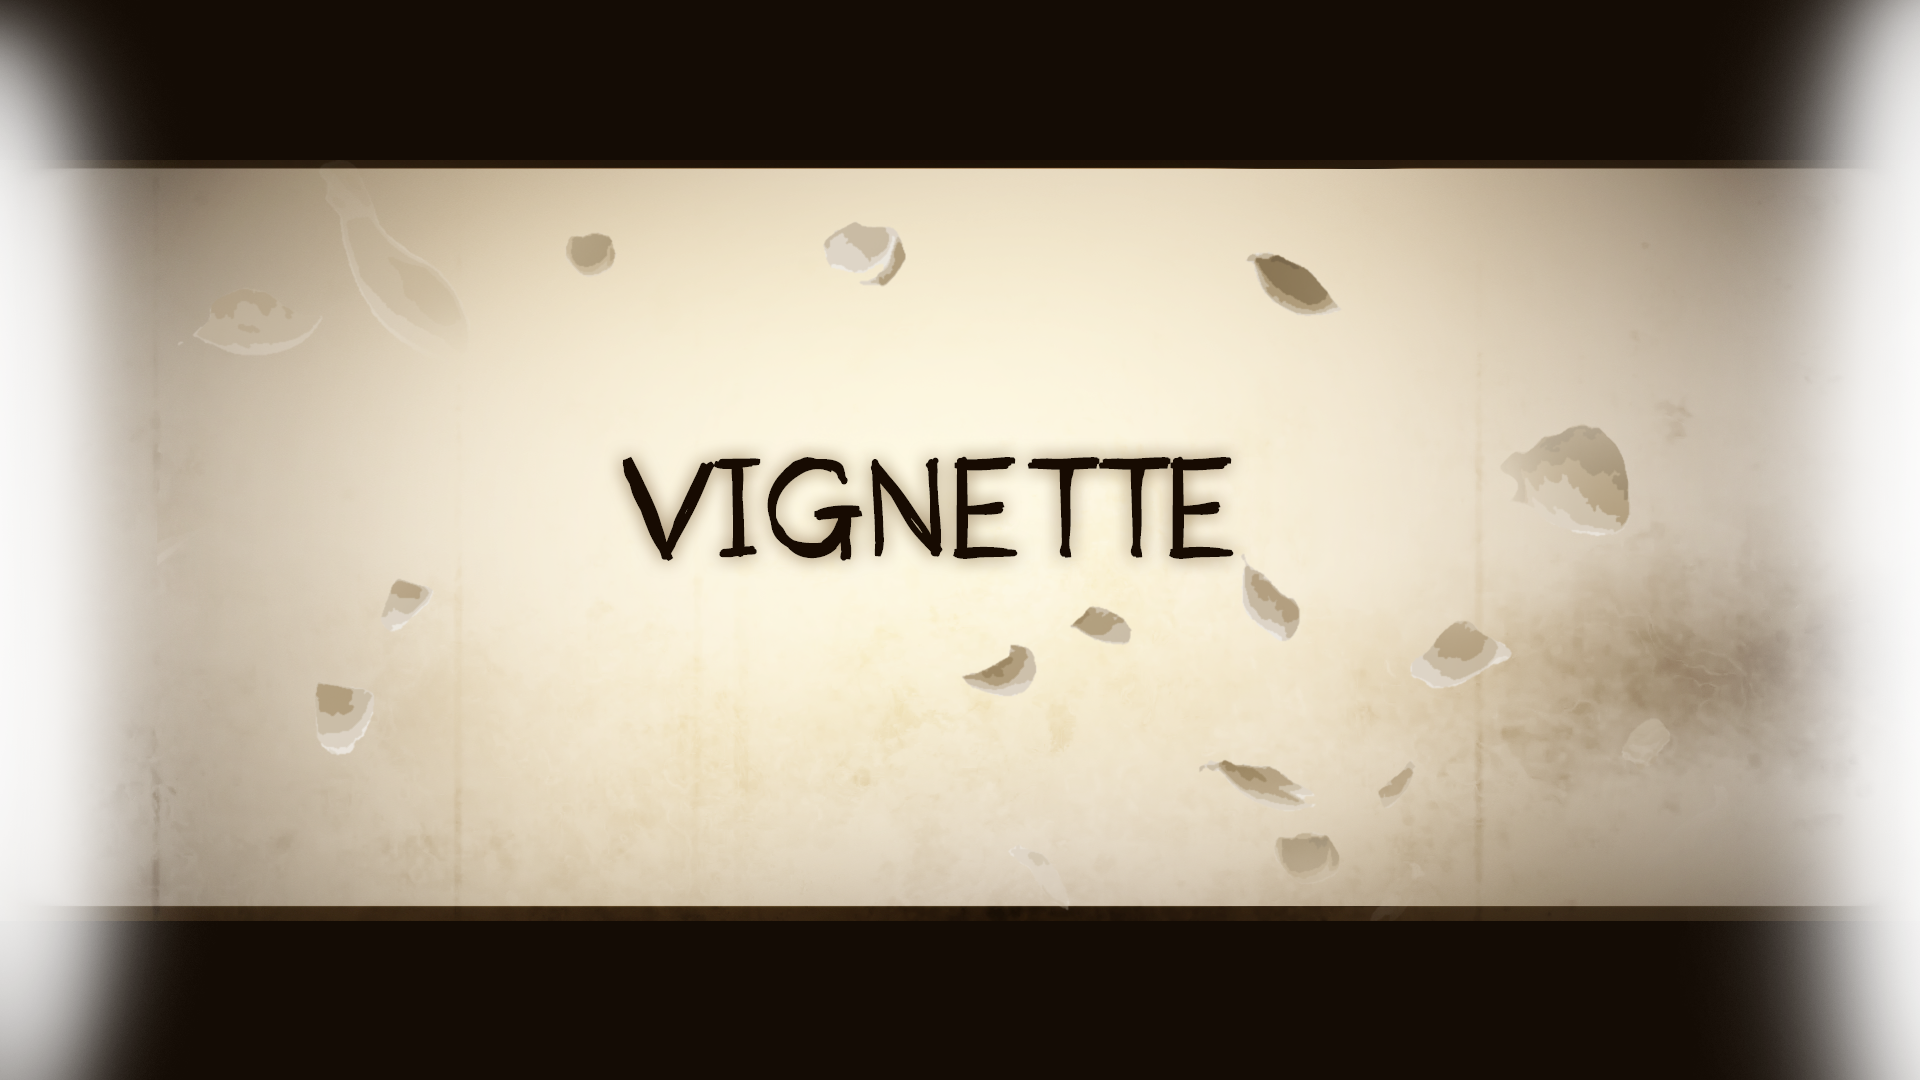 Vignette Png 1920X1080 / Tons of awesome christmas wallpapers 1920x1080